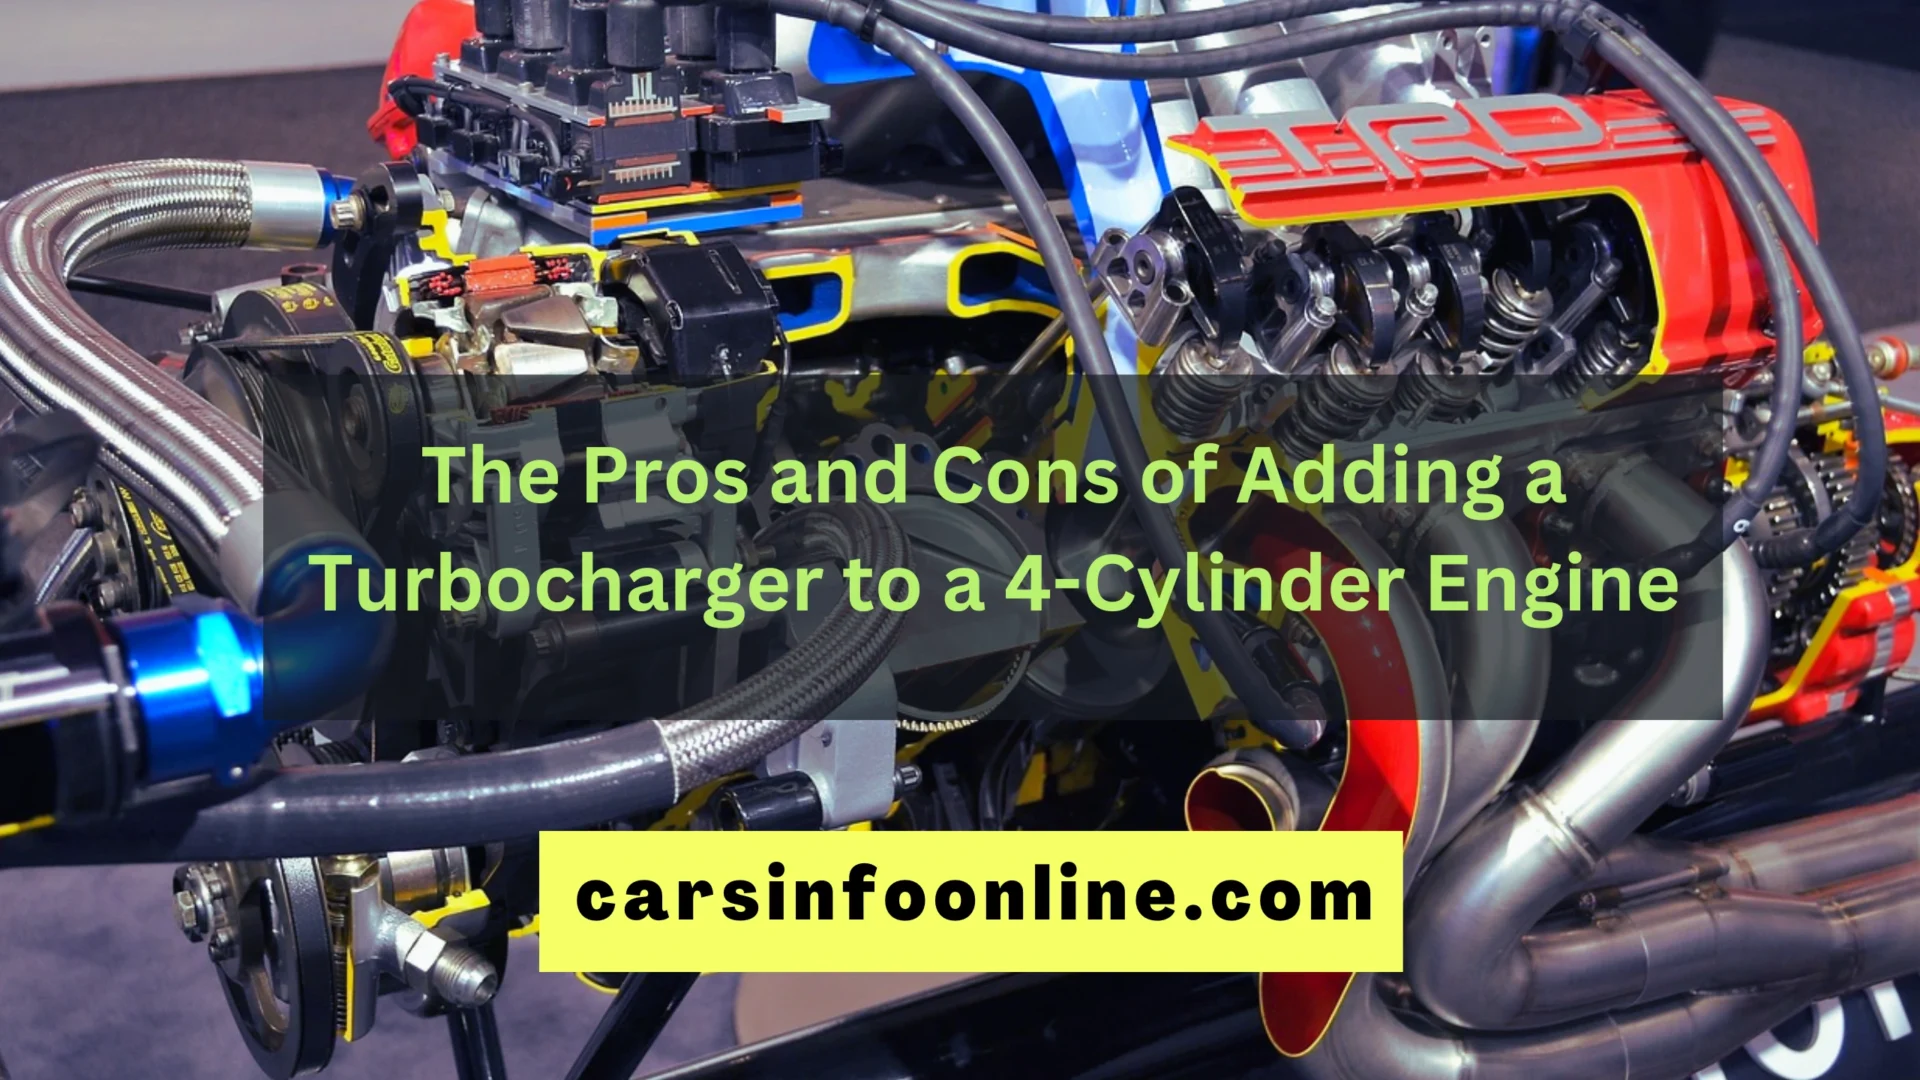 The Pros and Cons of Adding a Turbocharger to a 4-Cylinder Engine